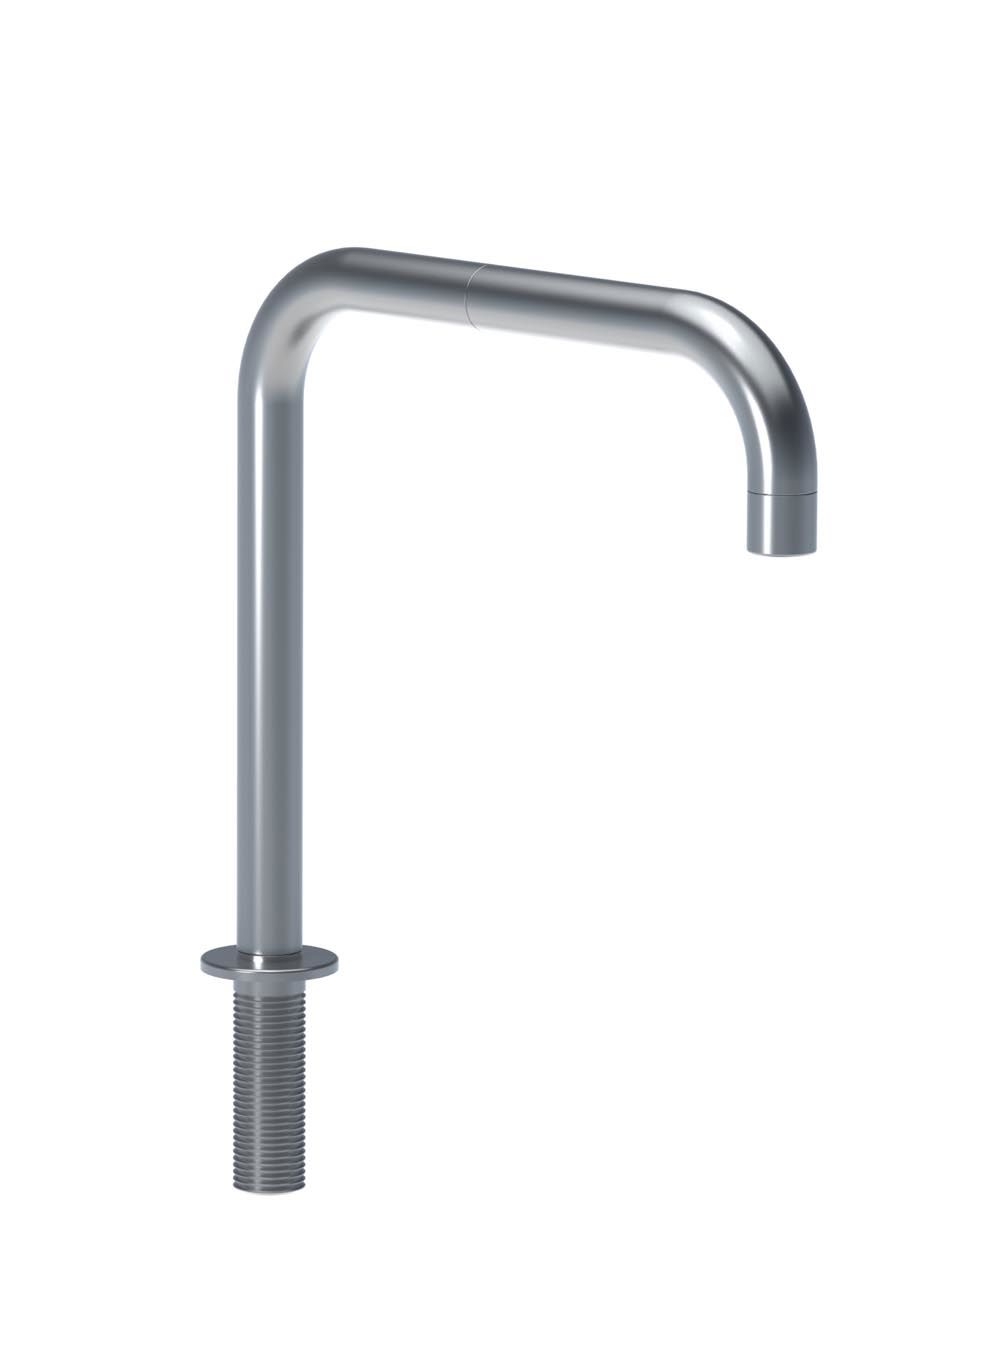 090: Double swivel spout.Height 210 mm. Hole cut out size: 22 mm.